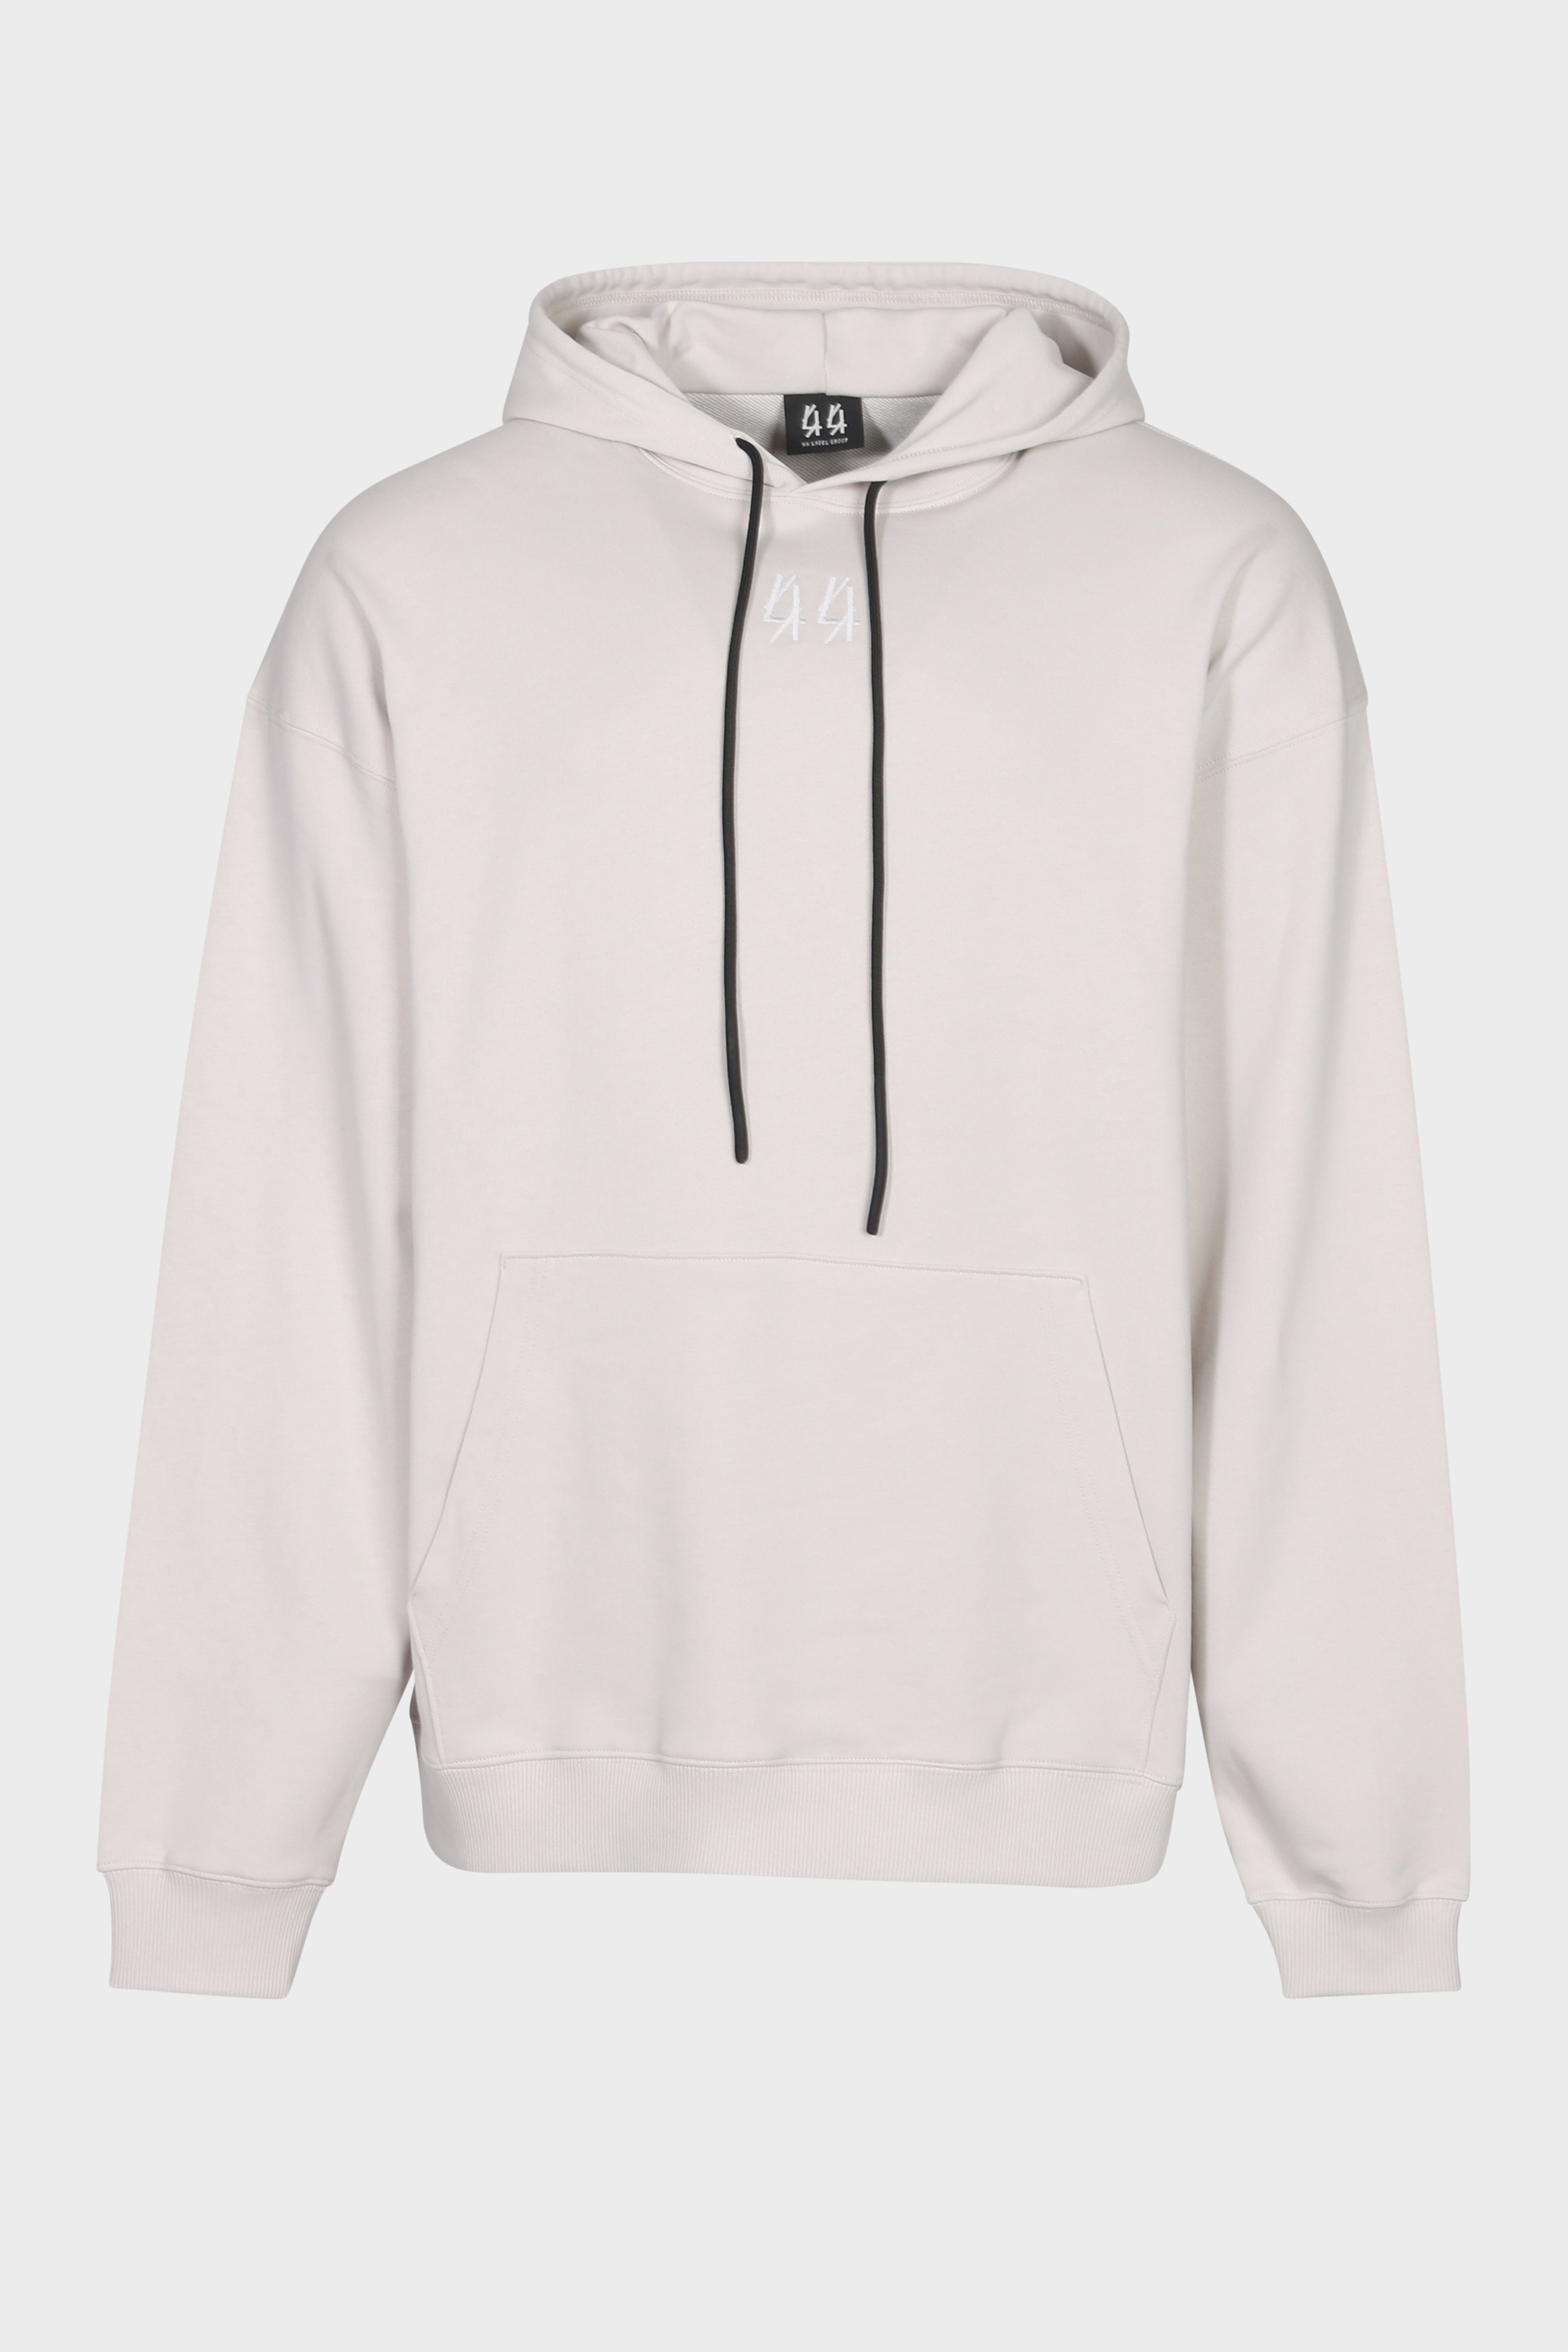 44 LABEL GROUP New Classic Hoodie in Dirty White/Black